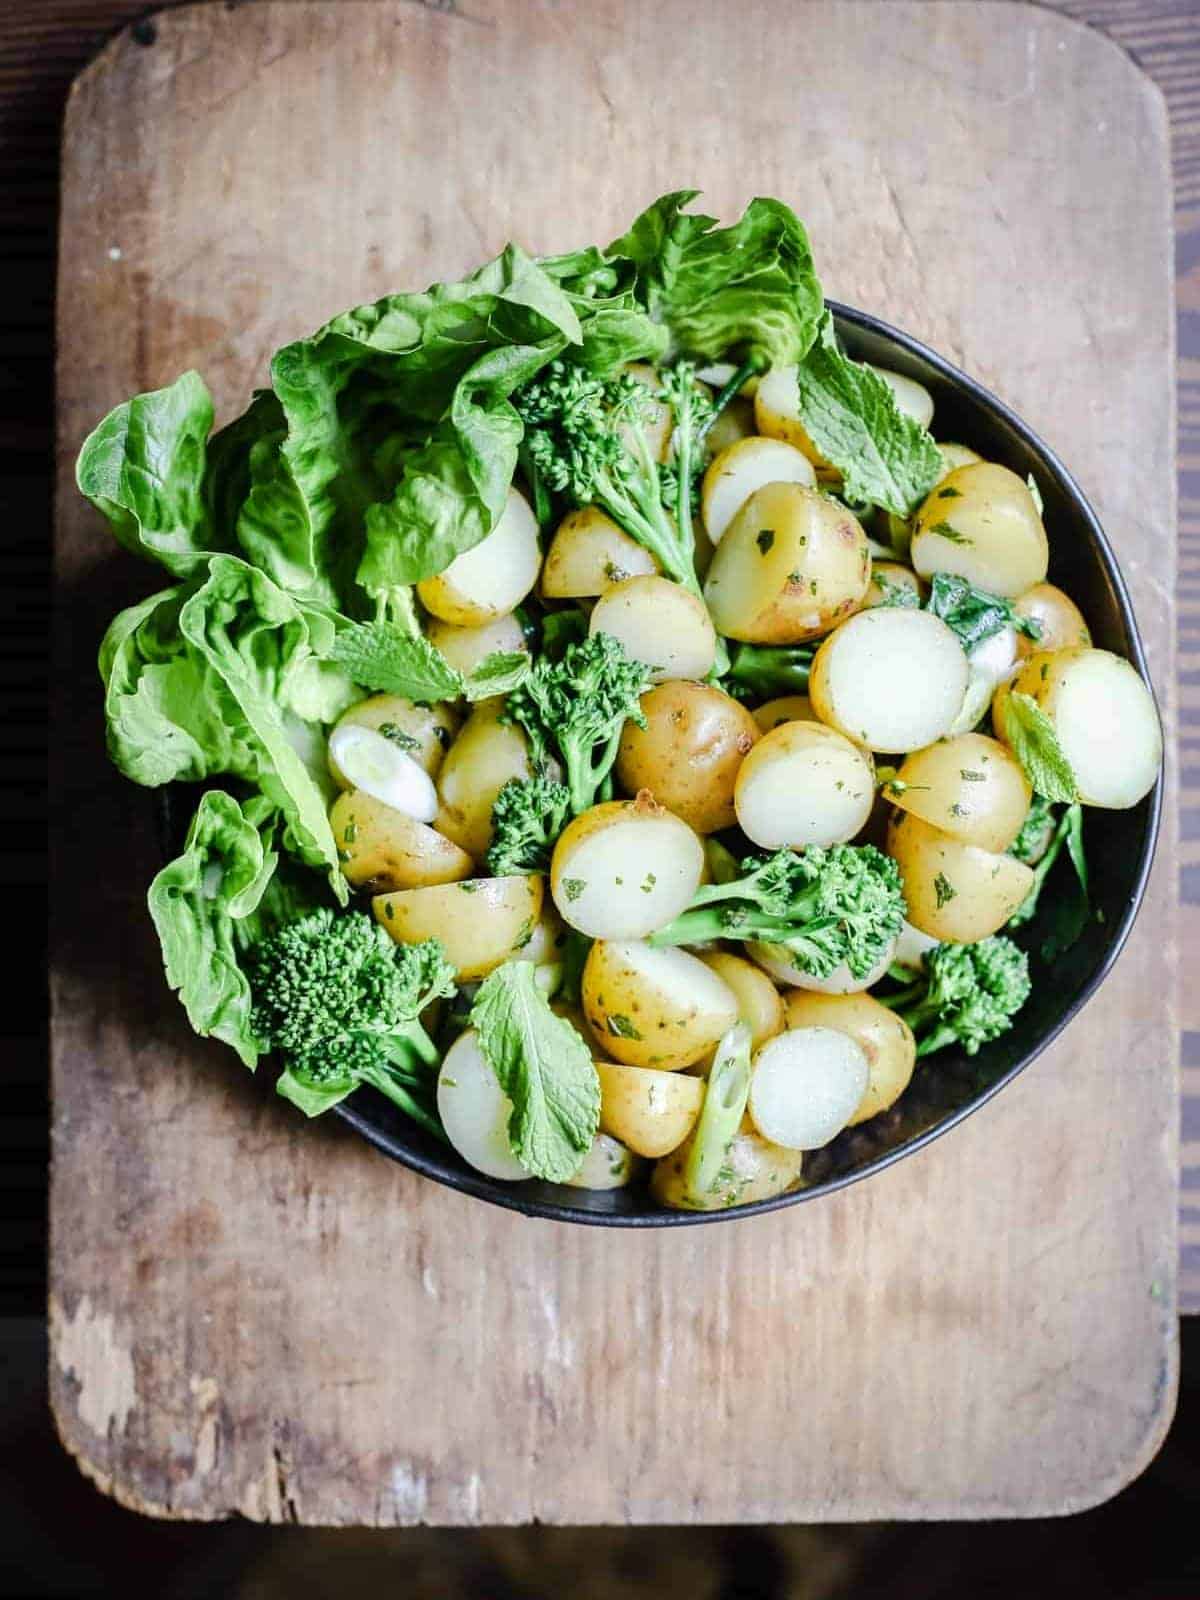 English mint potato salad in a black bowl served on a wooden board